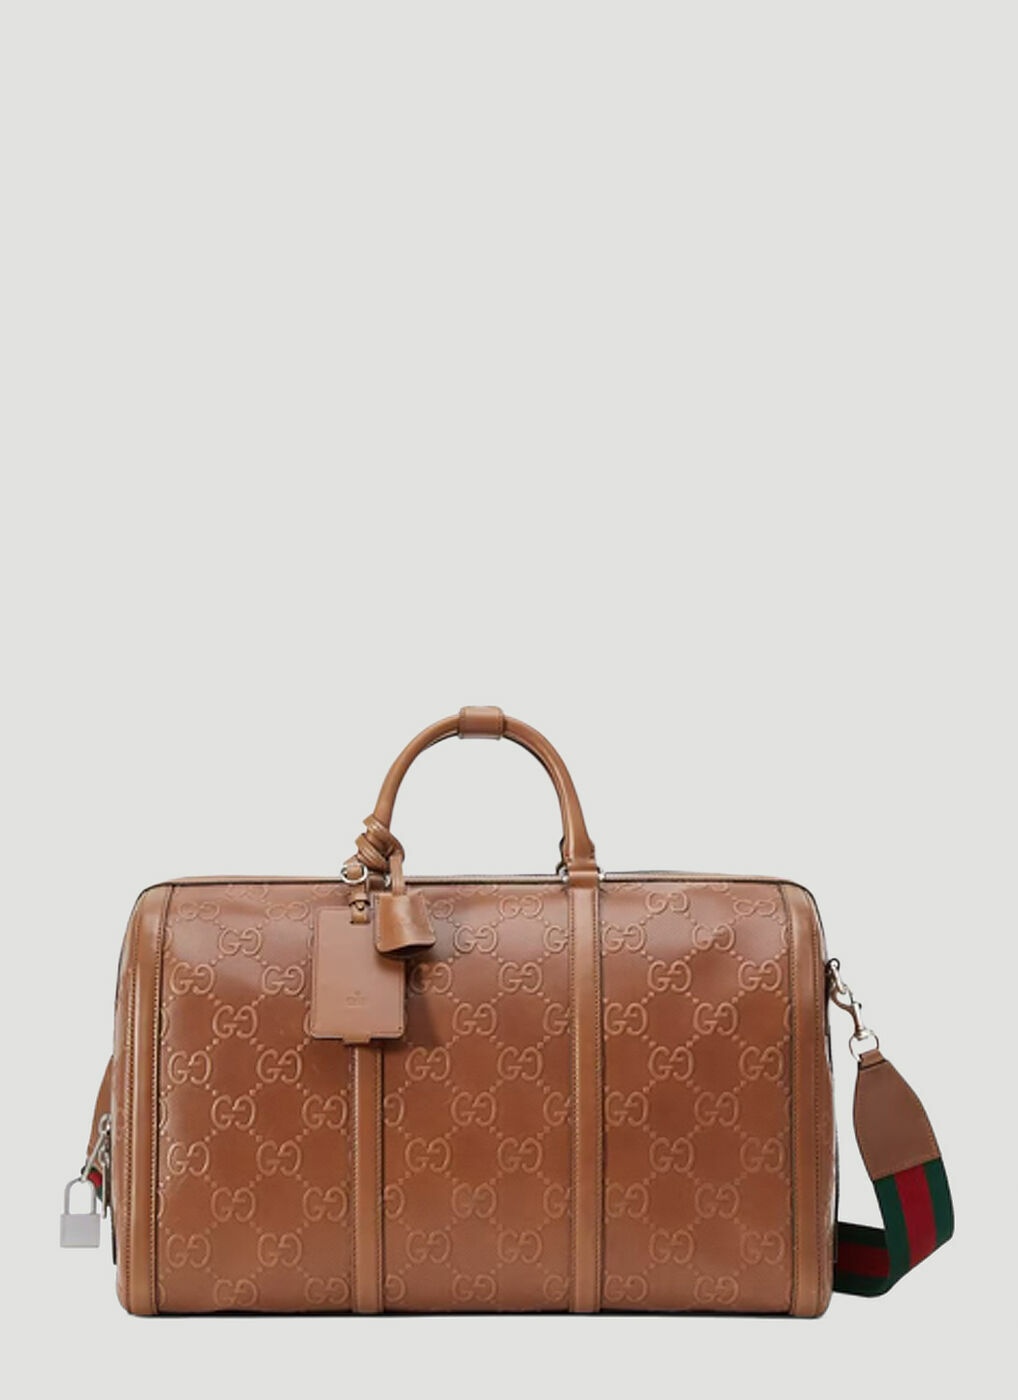  Gucci Duffle Brown Signature Guccissima Large Canvas Leather  Travel Luggage NEW